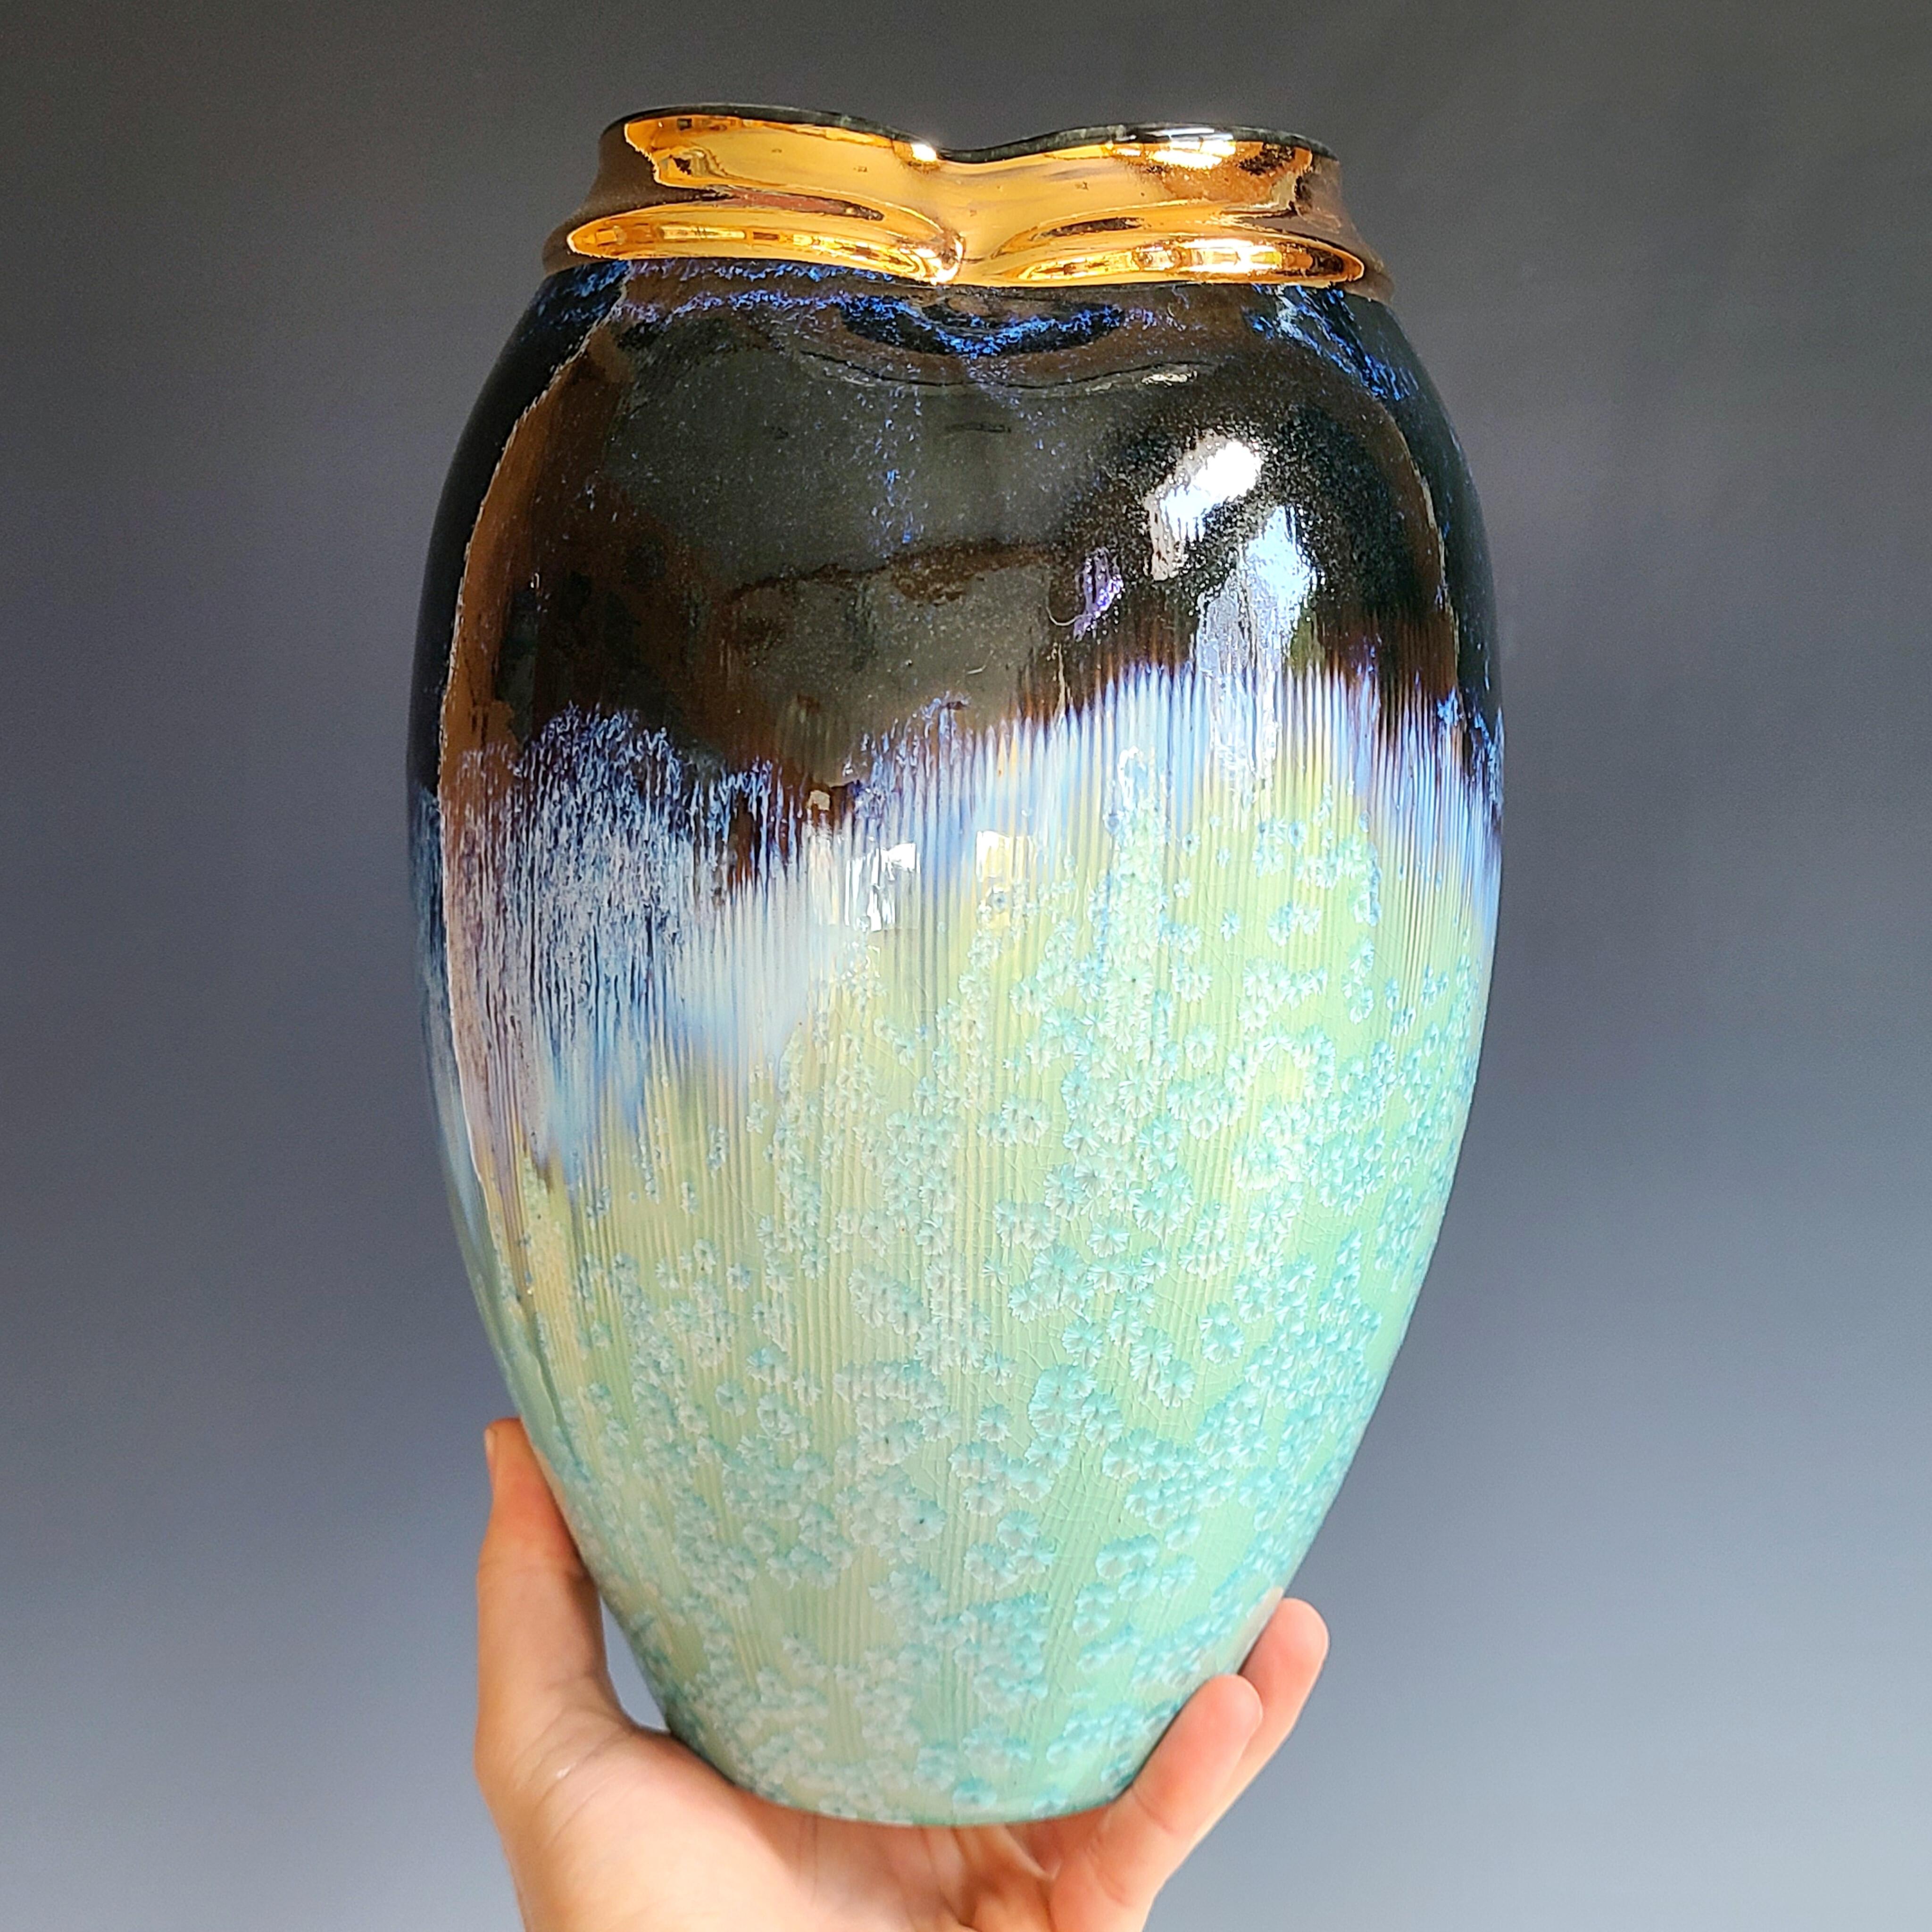 This glazed porcelain vessel by Jon Puzzuoli features a deep, midnight blue and mint green palette, with a crystalline glaze and 18K gold luster along the neck. The artist's stamp is located at the base of the vessel.

Crystalline glazes are special